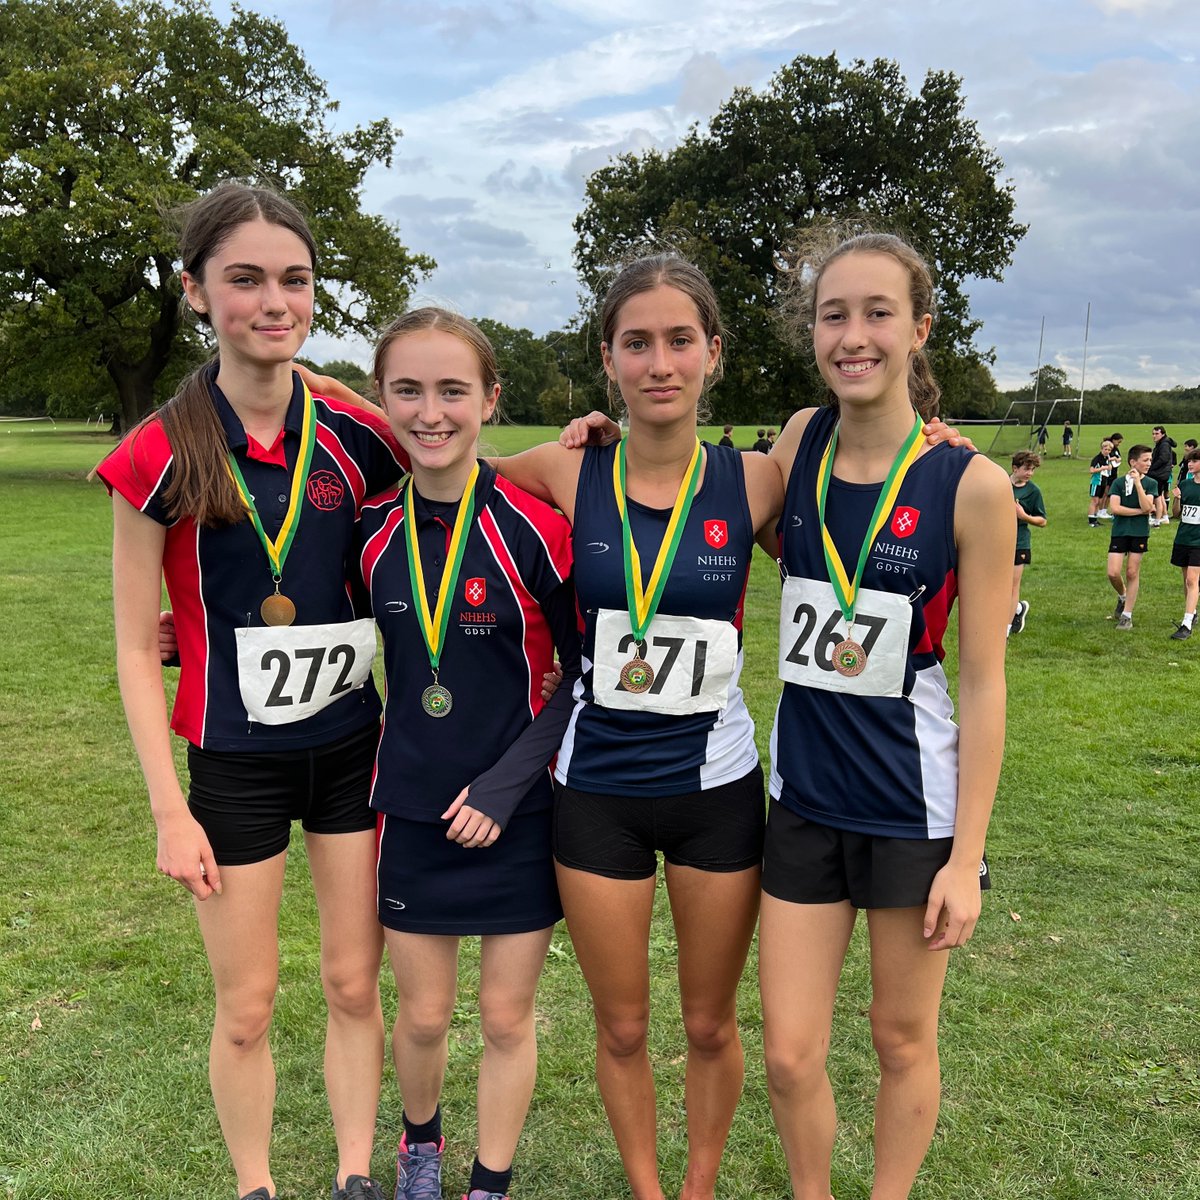 A great afternoon of cross country for @nhehs at the Ealing Schools Cross Country Champs 🎽

With a few Top 3 placings announced at the finish, we await the final results 🤞🏻

#NHEHSsport #CrossCountry #EalingSchools